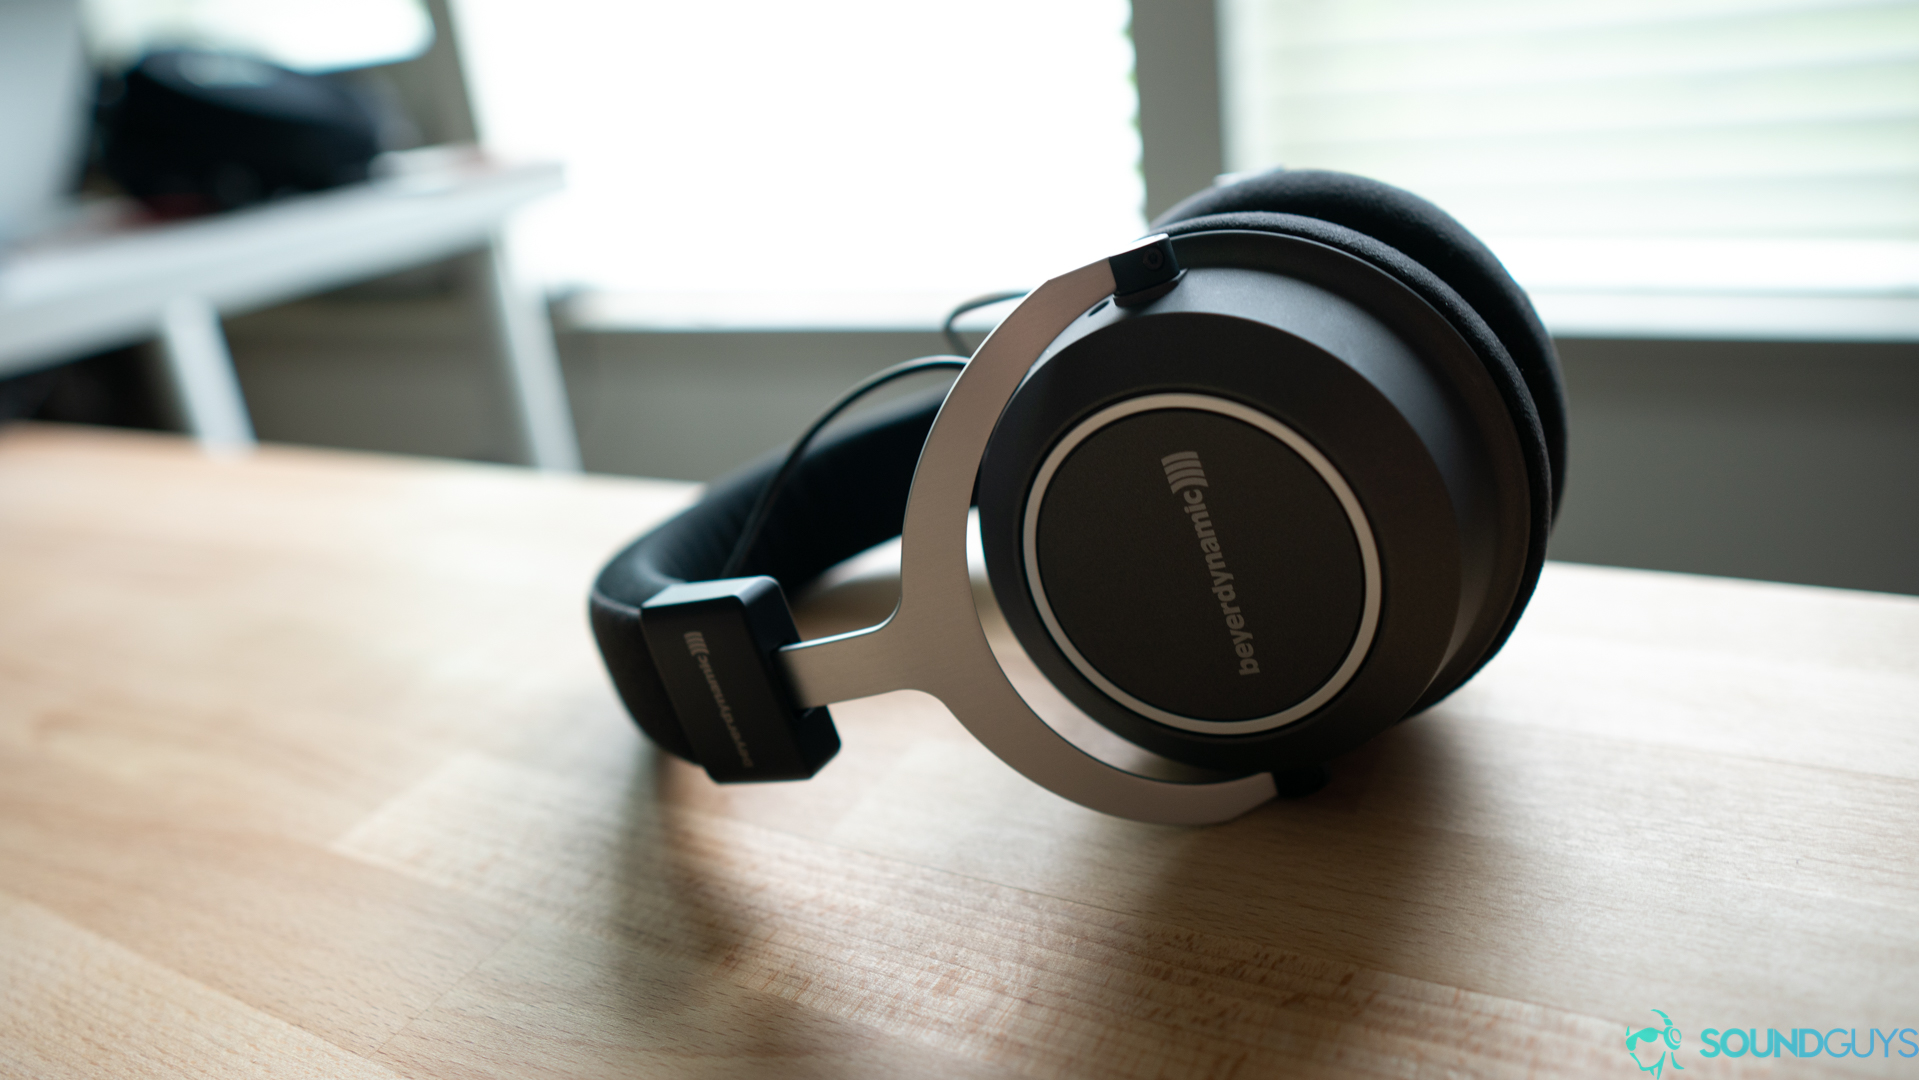 Image shows the Beyerdynamic Amiron Wireless resting on its side on a wood table.